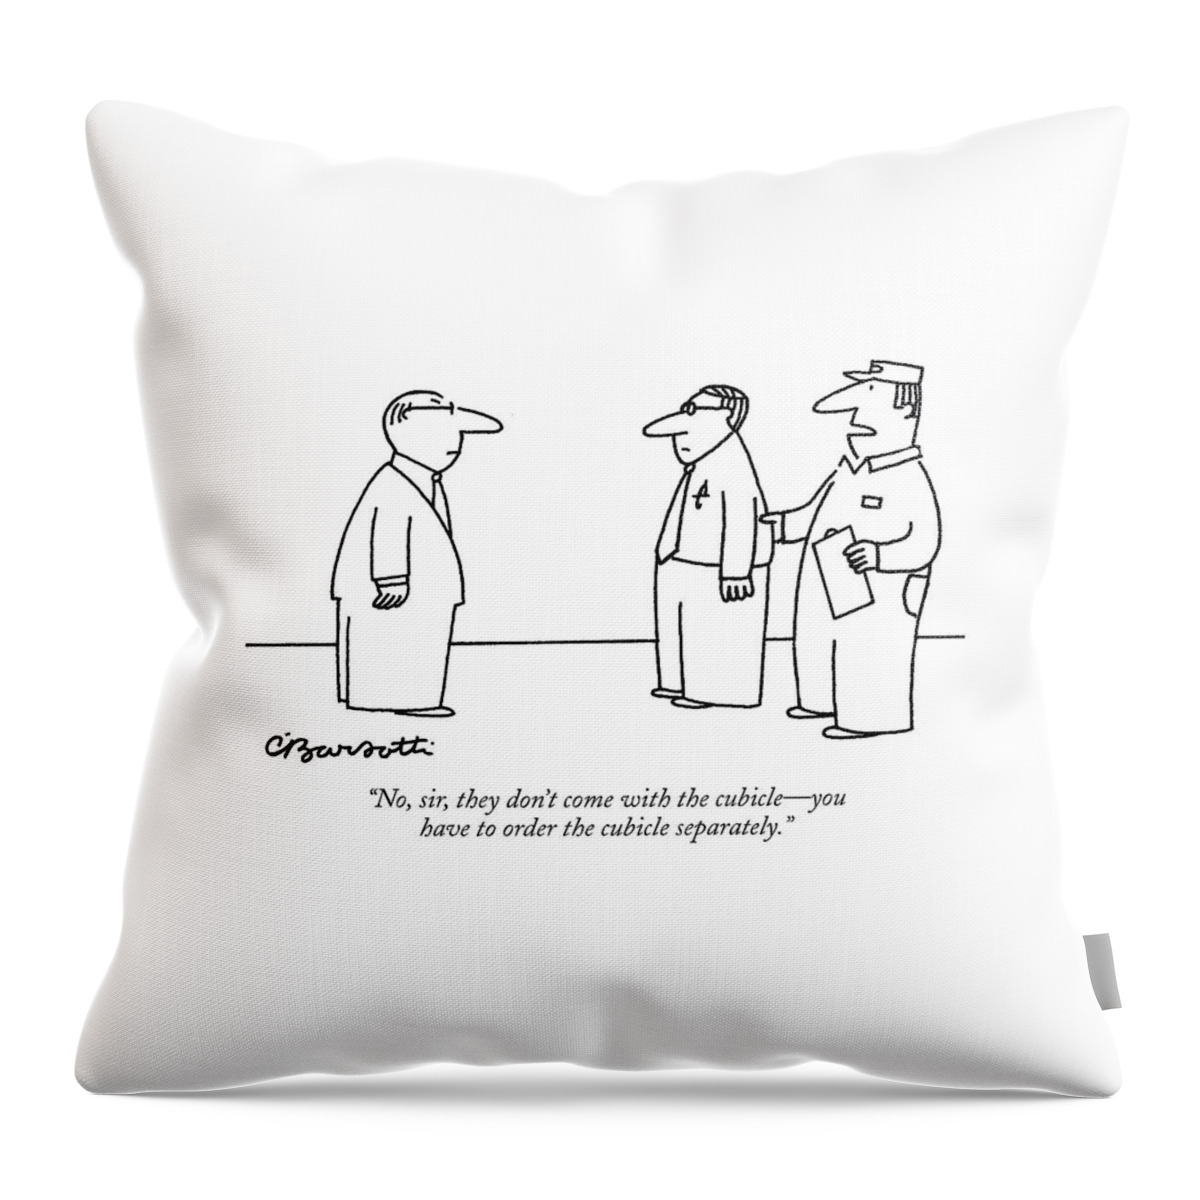 No, Sir, They Don't Come With The Cubicle - Throw Pillow